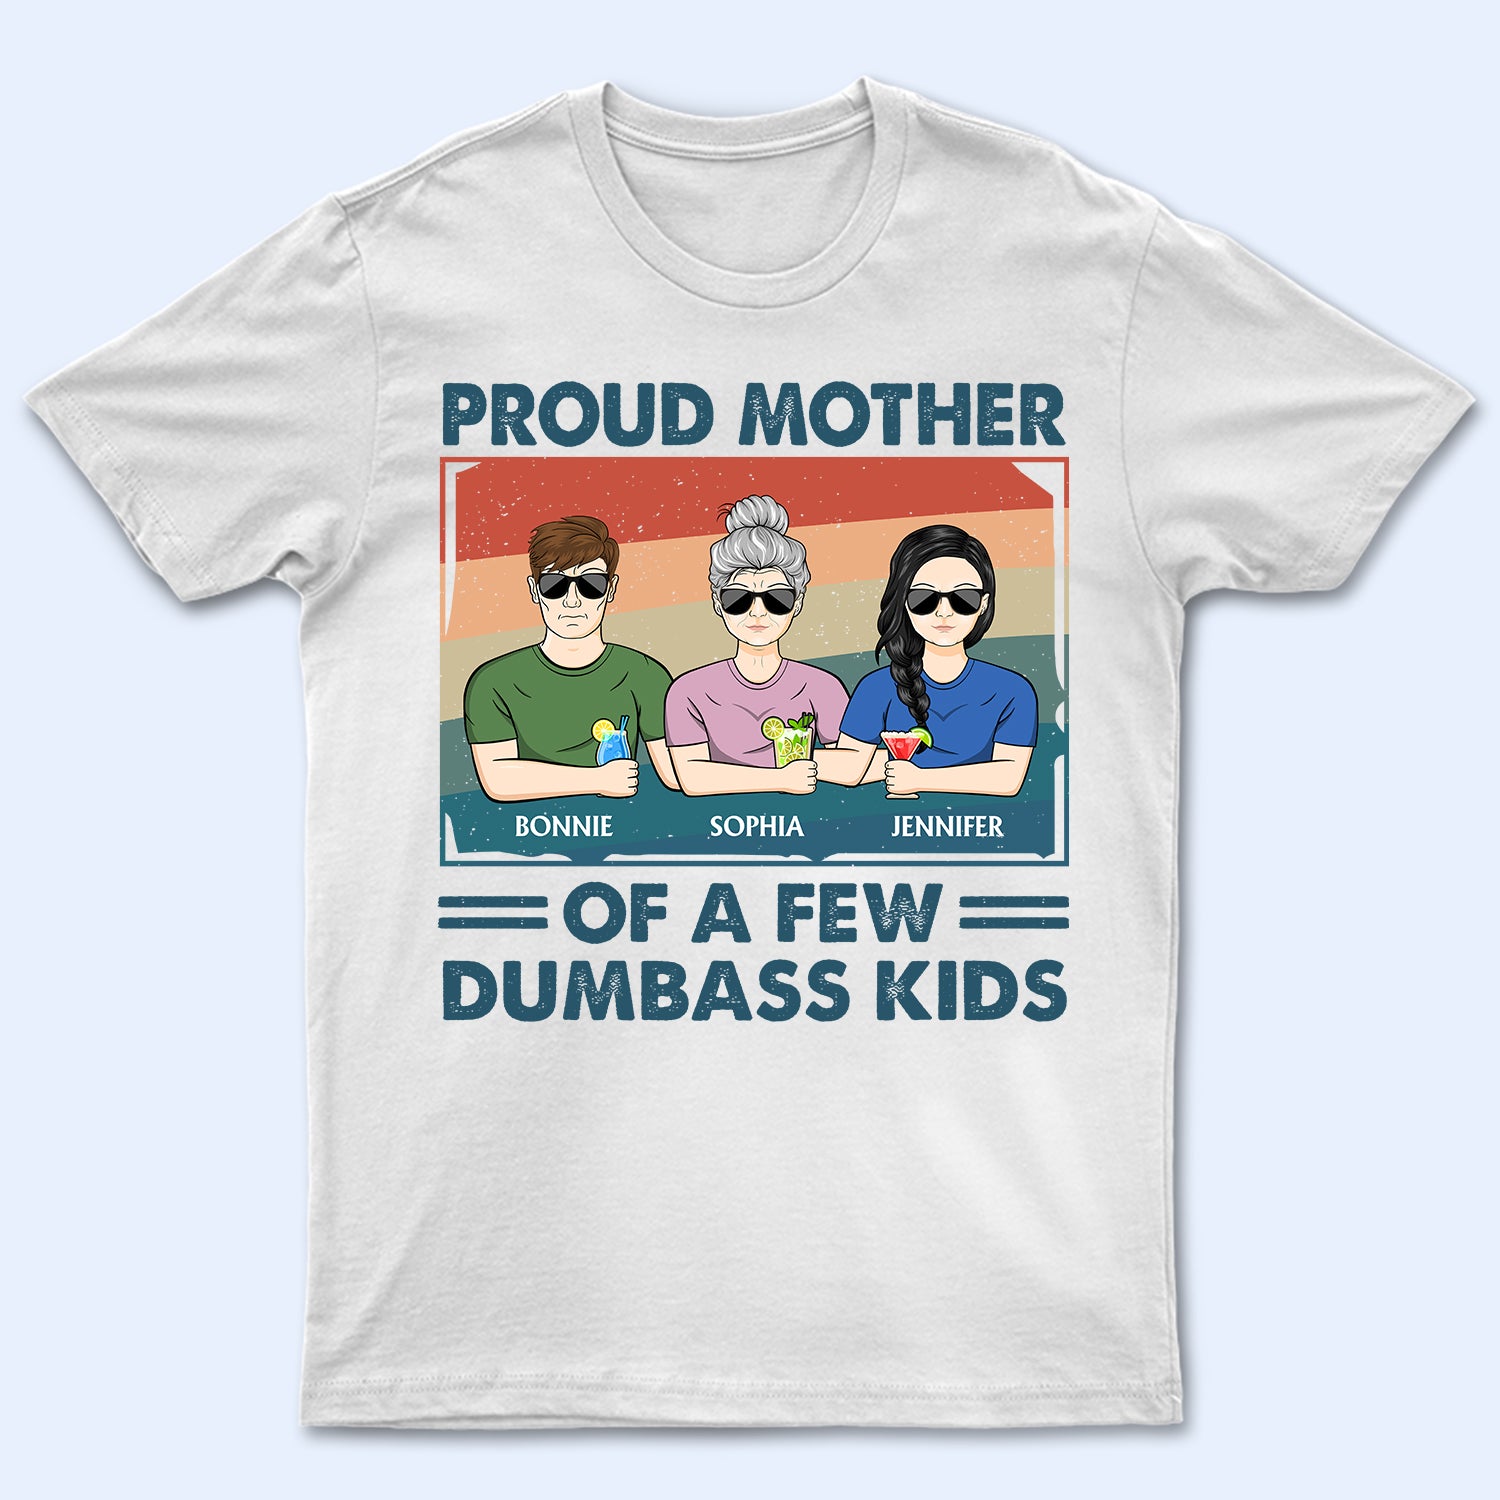 Proud Mother Of A Few Kids - Funny Gift For Mother, Mom, Grandma - Personalized T Shirt